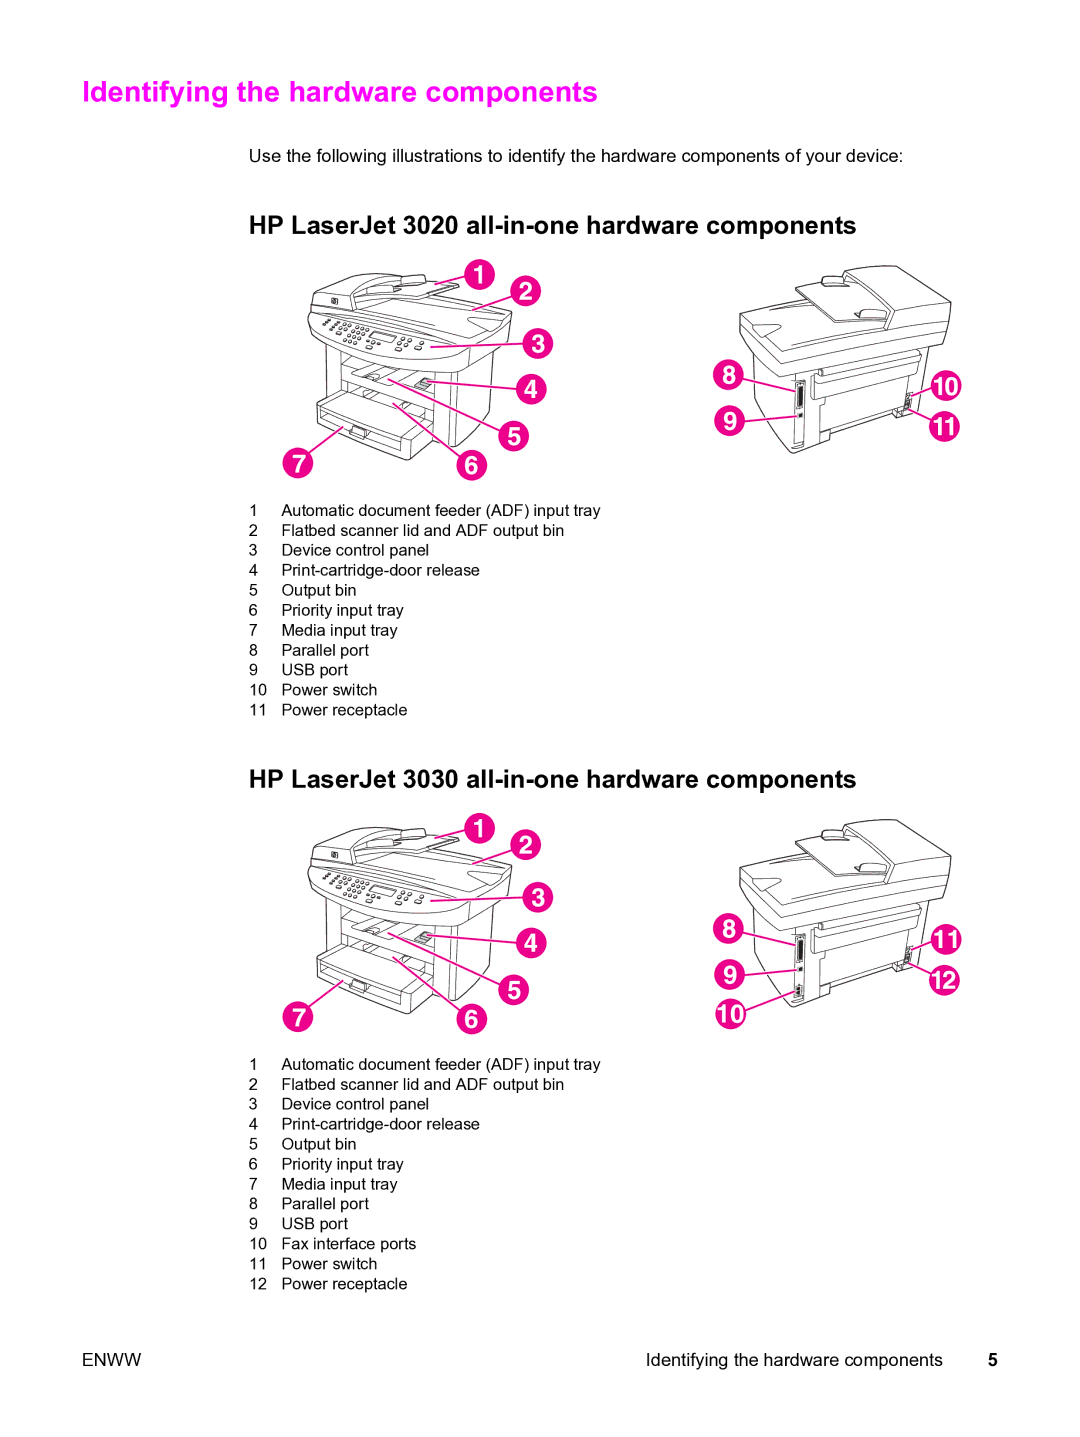 HP manual Identifying the hardware components, HP LaserJet 3020 all-in-one hardware components 